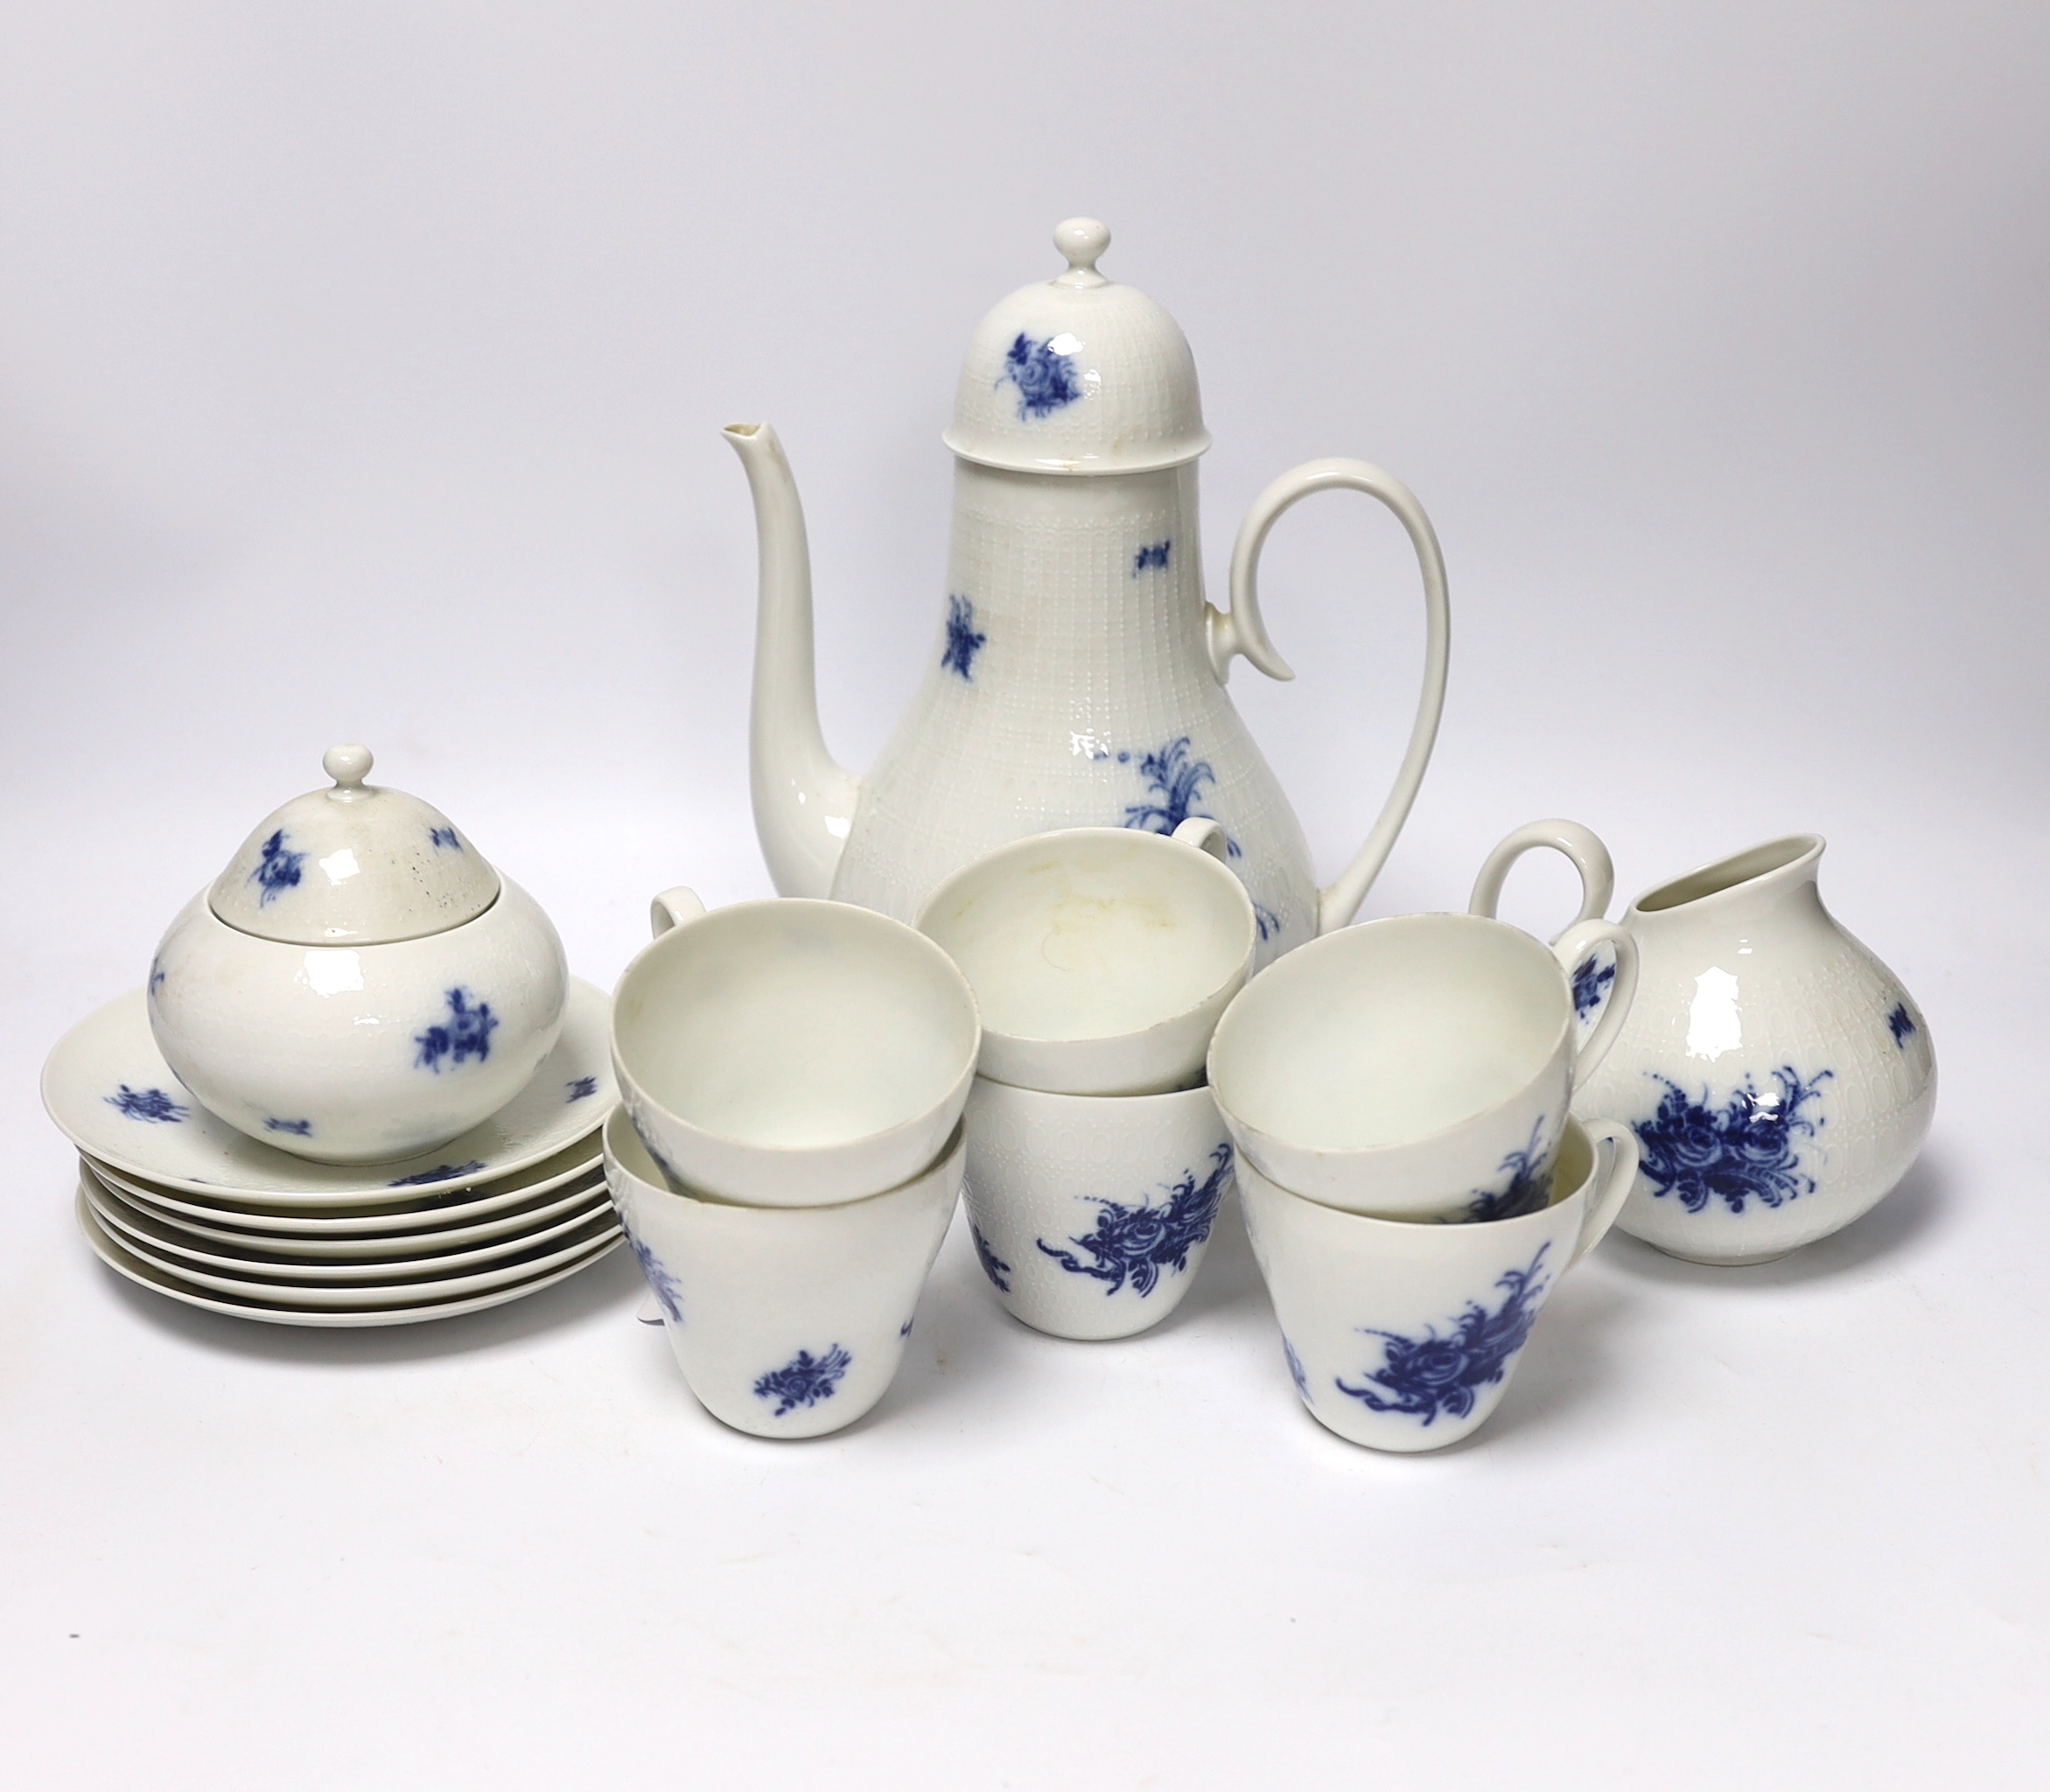 A Rosenthal blue and white coffee set                                                                                                                                                                                       